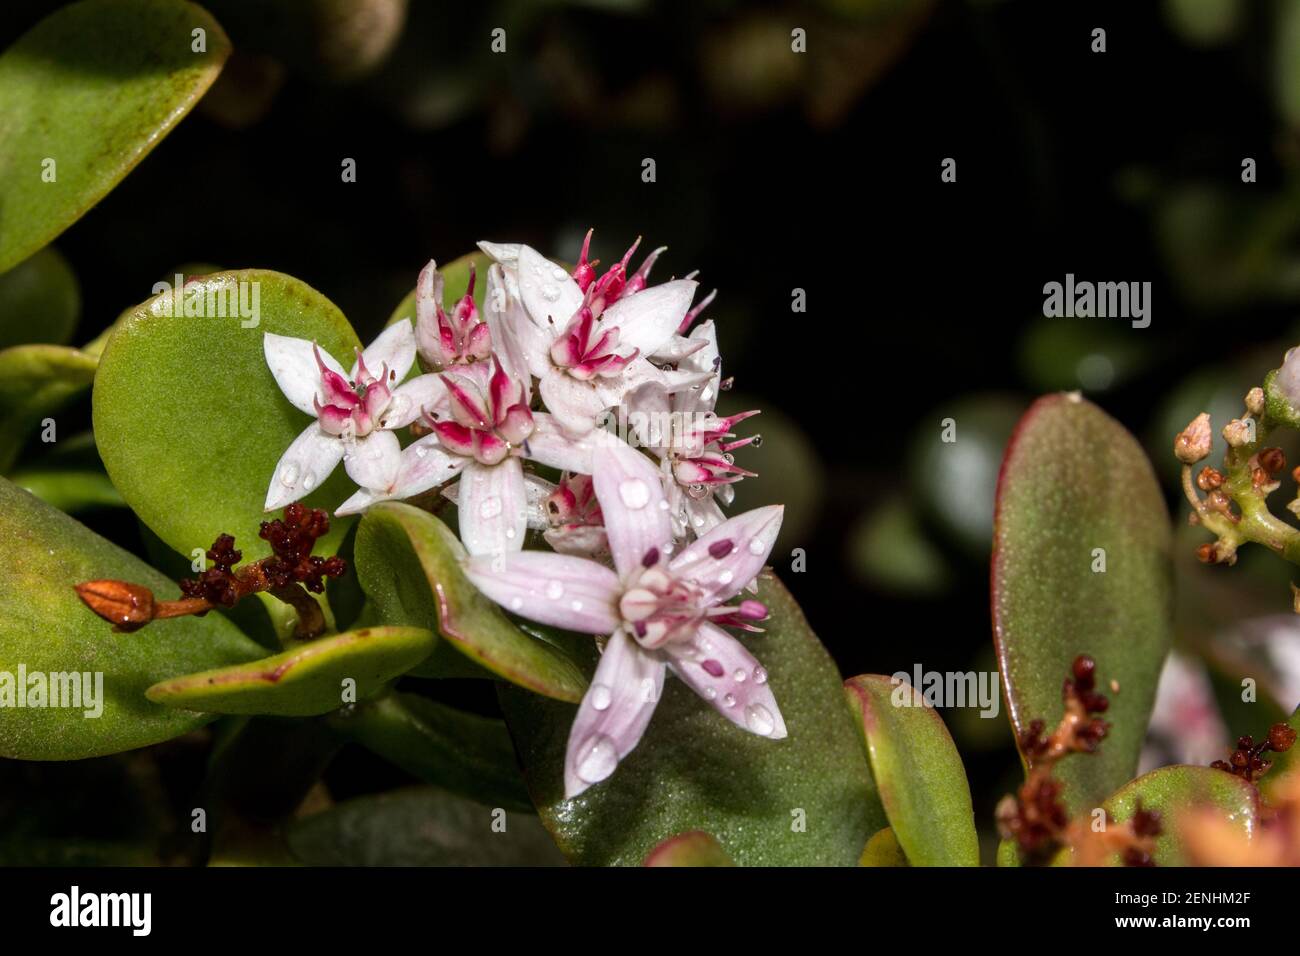 The Starshaped flowers of a Jade Plant, Crassula Ovata, also known a Penny Plant, covered in water droplets Stock Photo